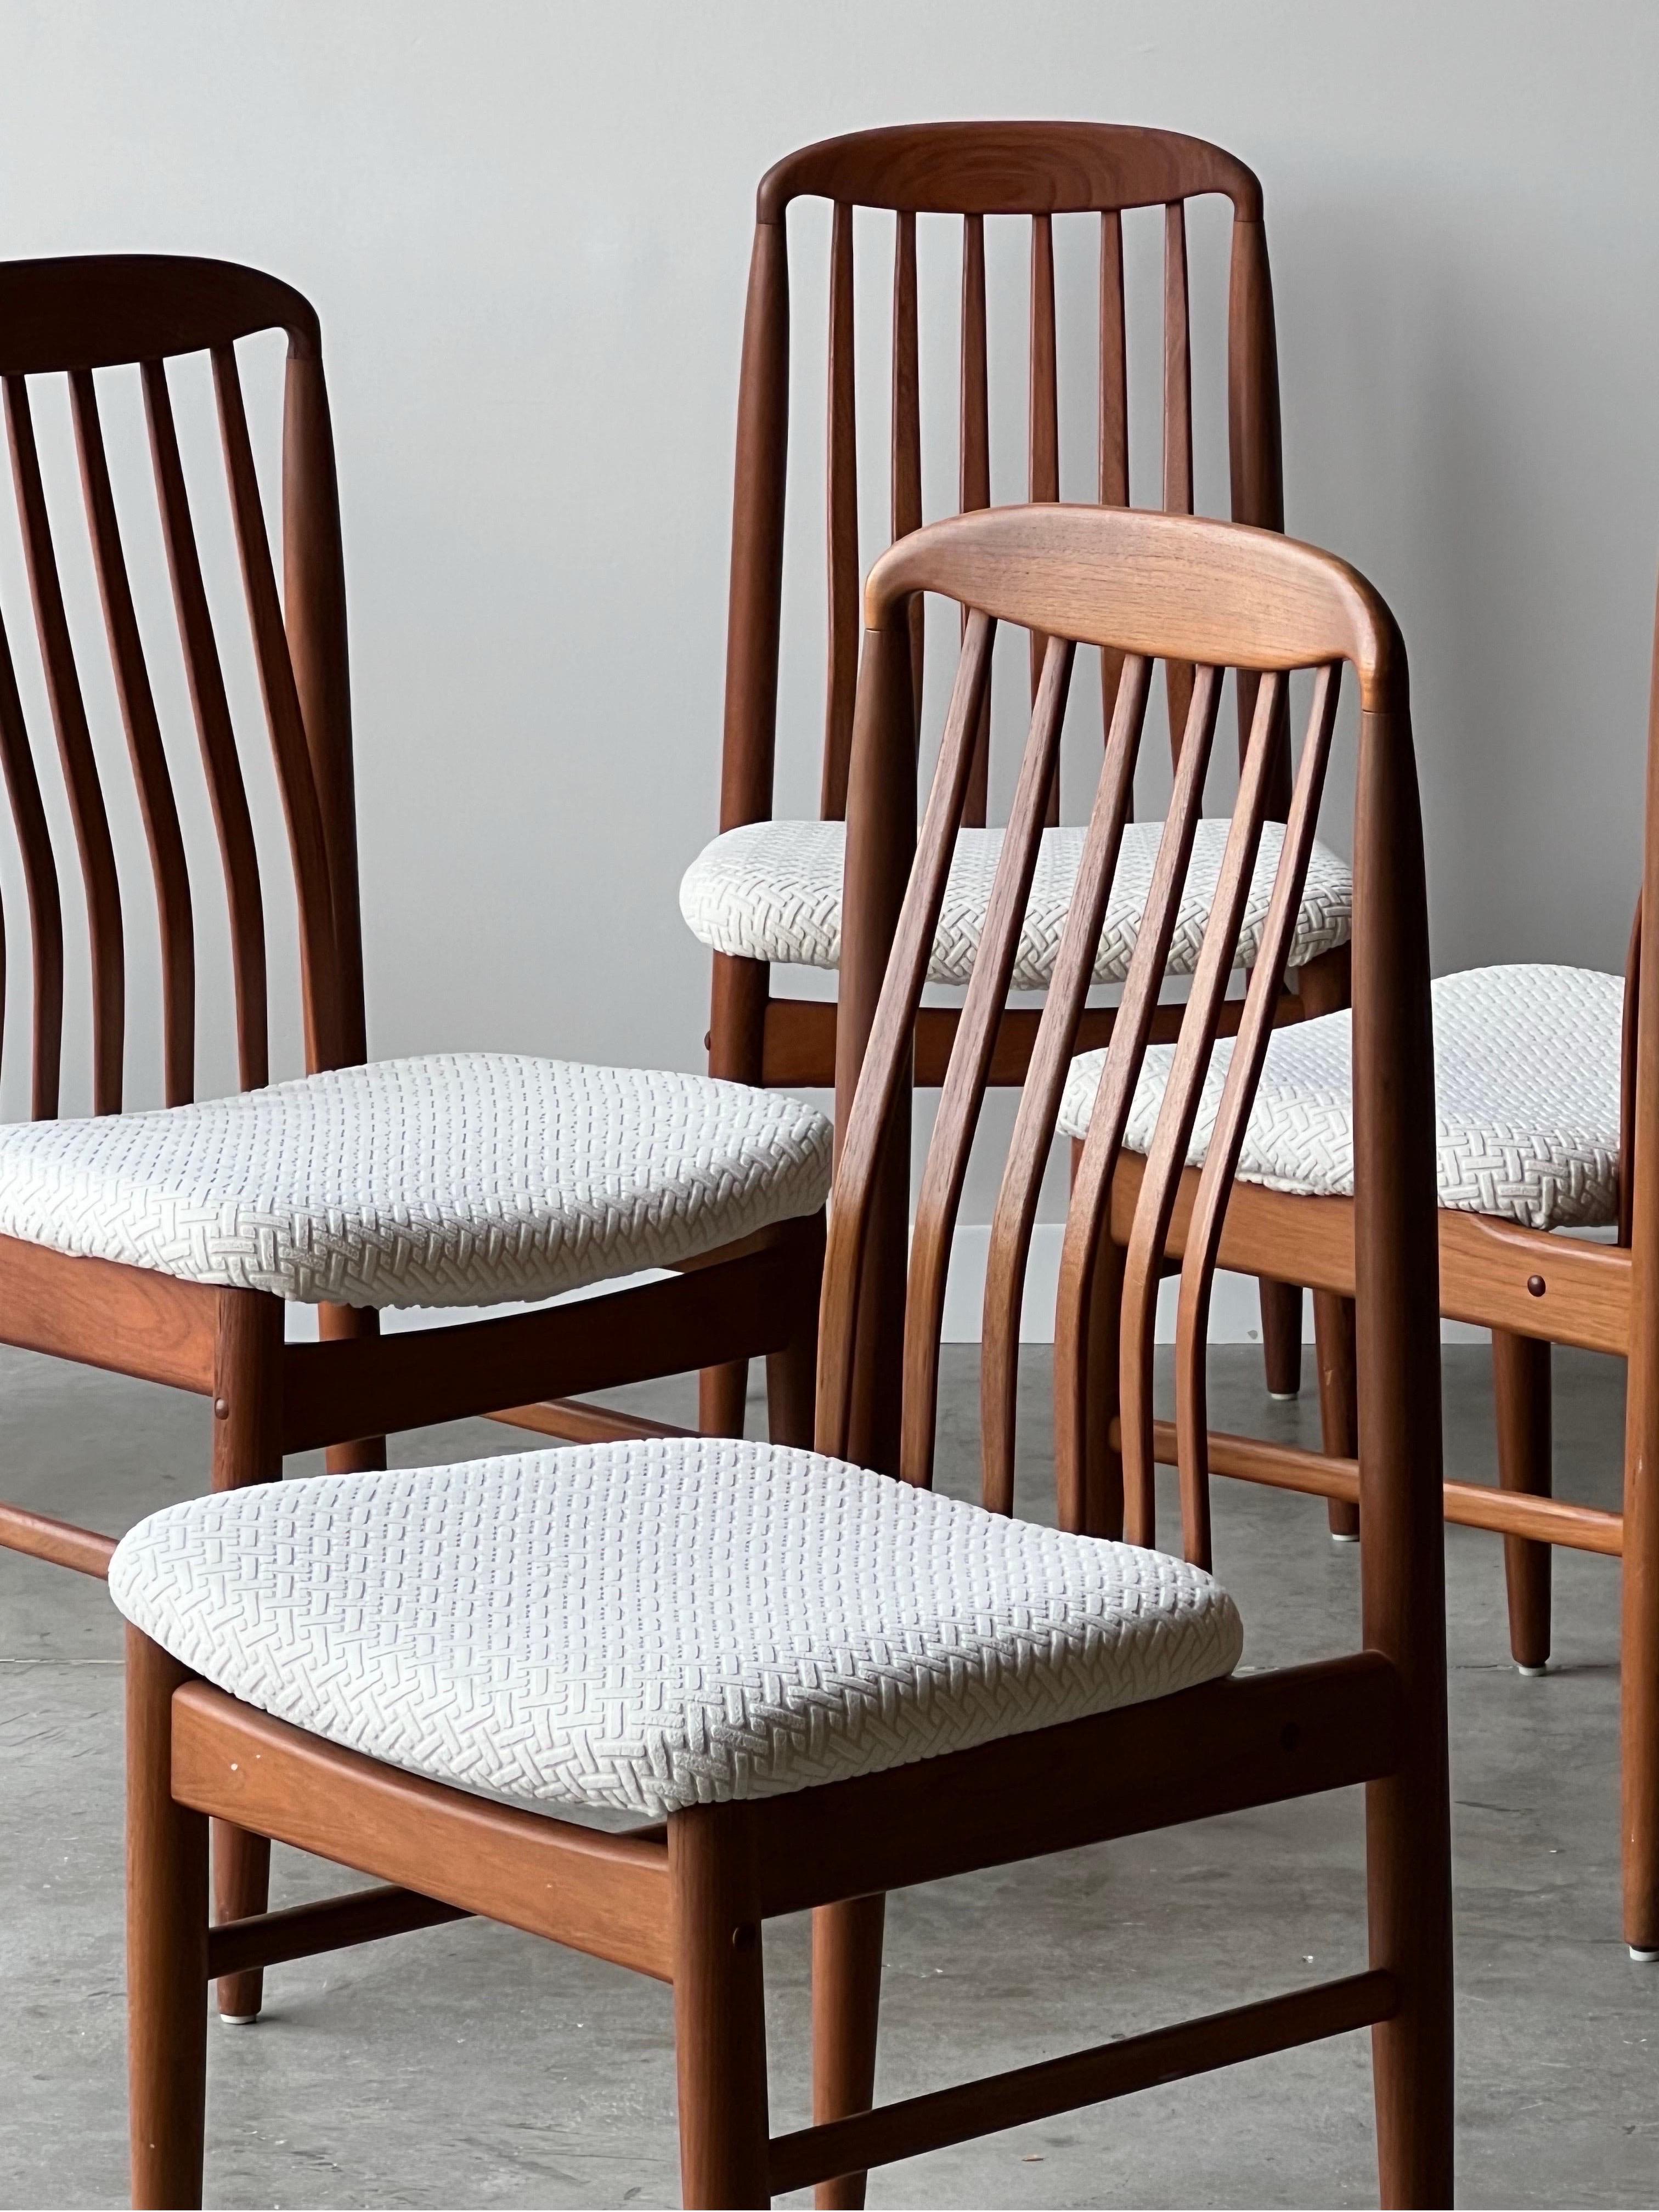 Mid-century set of six dining chairs designed by Benny Linden, Denmark. Made from Danish teak wood. The legs of the chairs are sculpted tapered teak. The back legs lead all the way to the top of the chair. The backrest consists of teak slats that